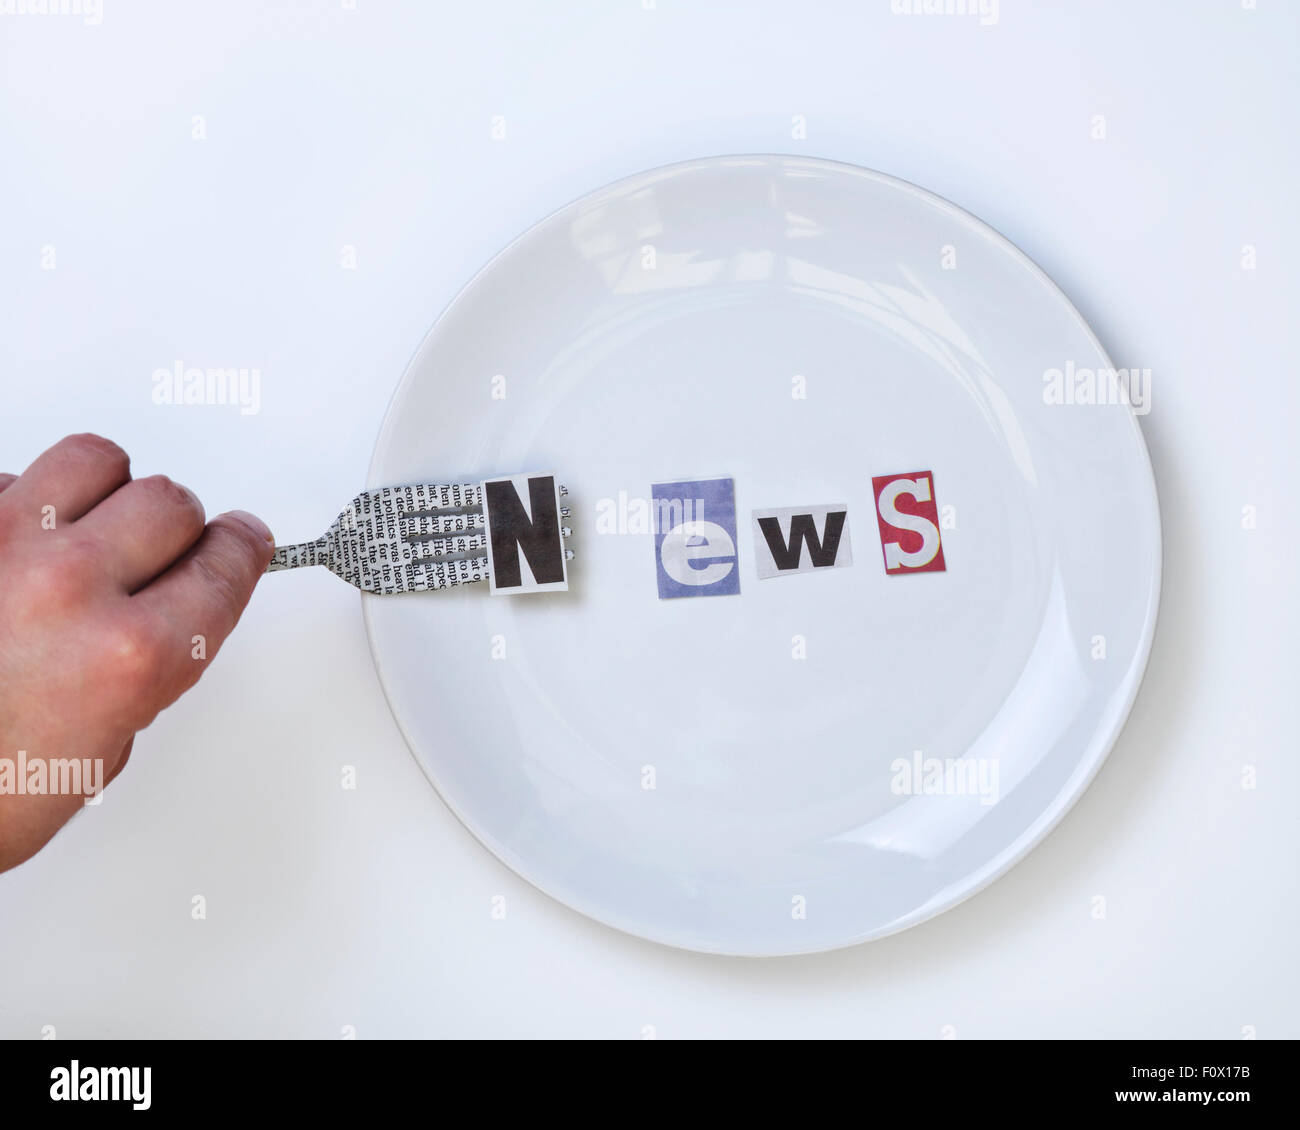 Serving News Concept : Cutout News Word on White Plate Composed and Letter N on Fork Covered with Newspaper Text Stock Photo